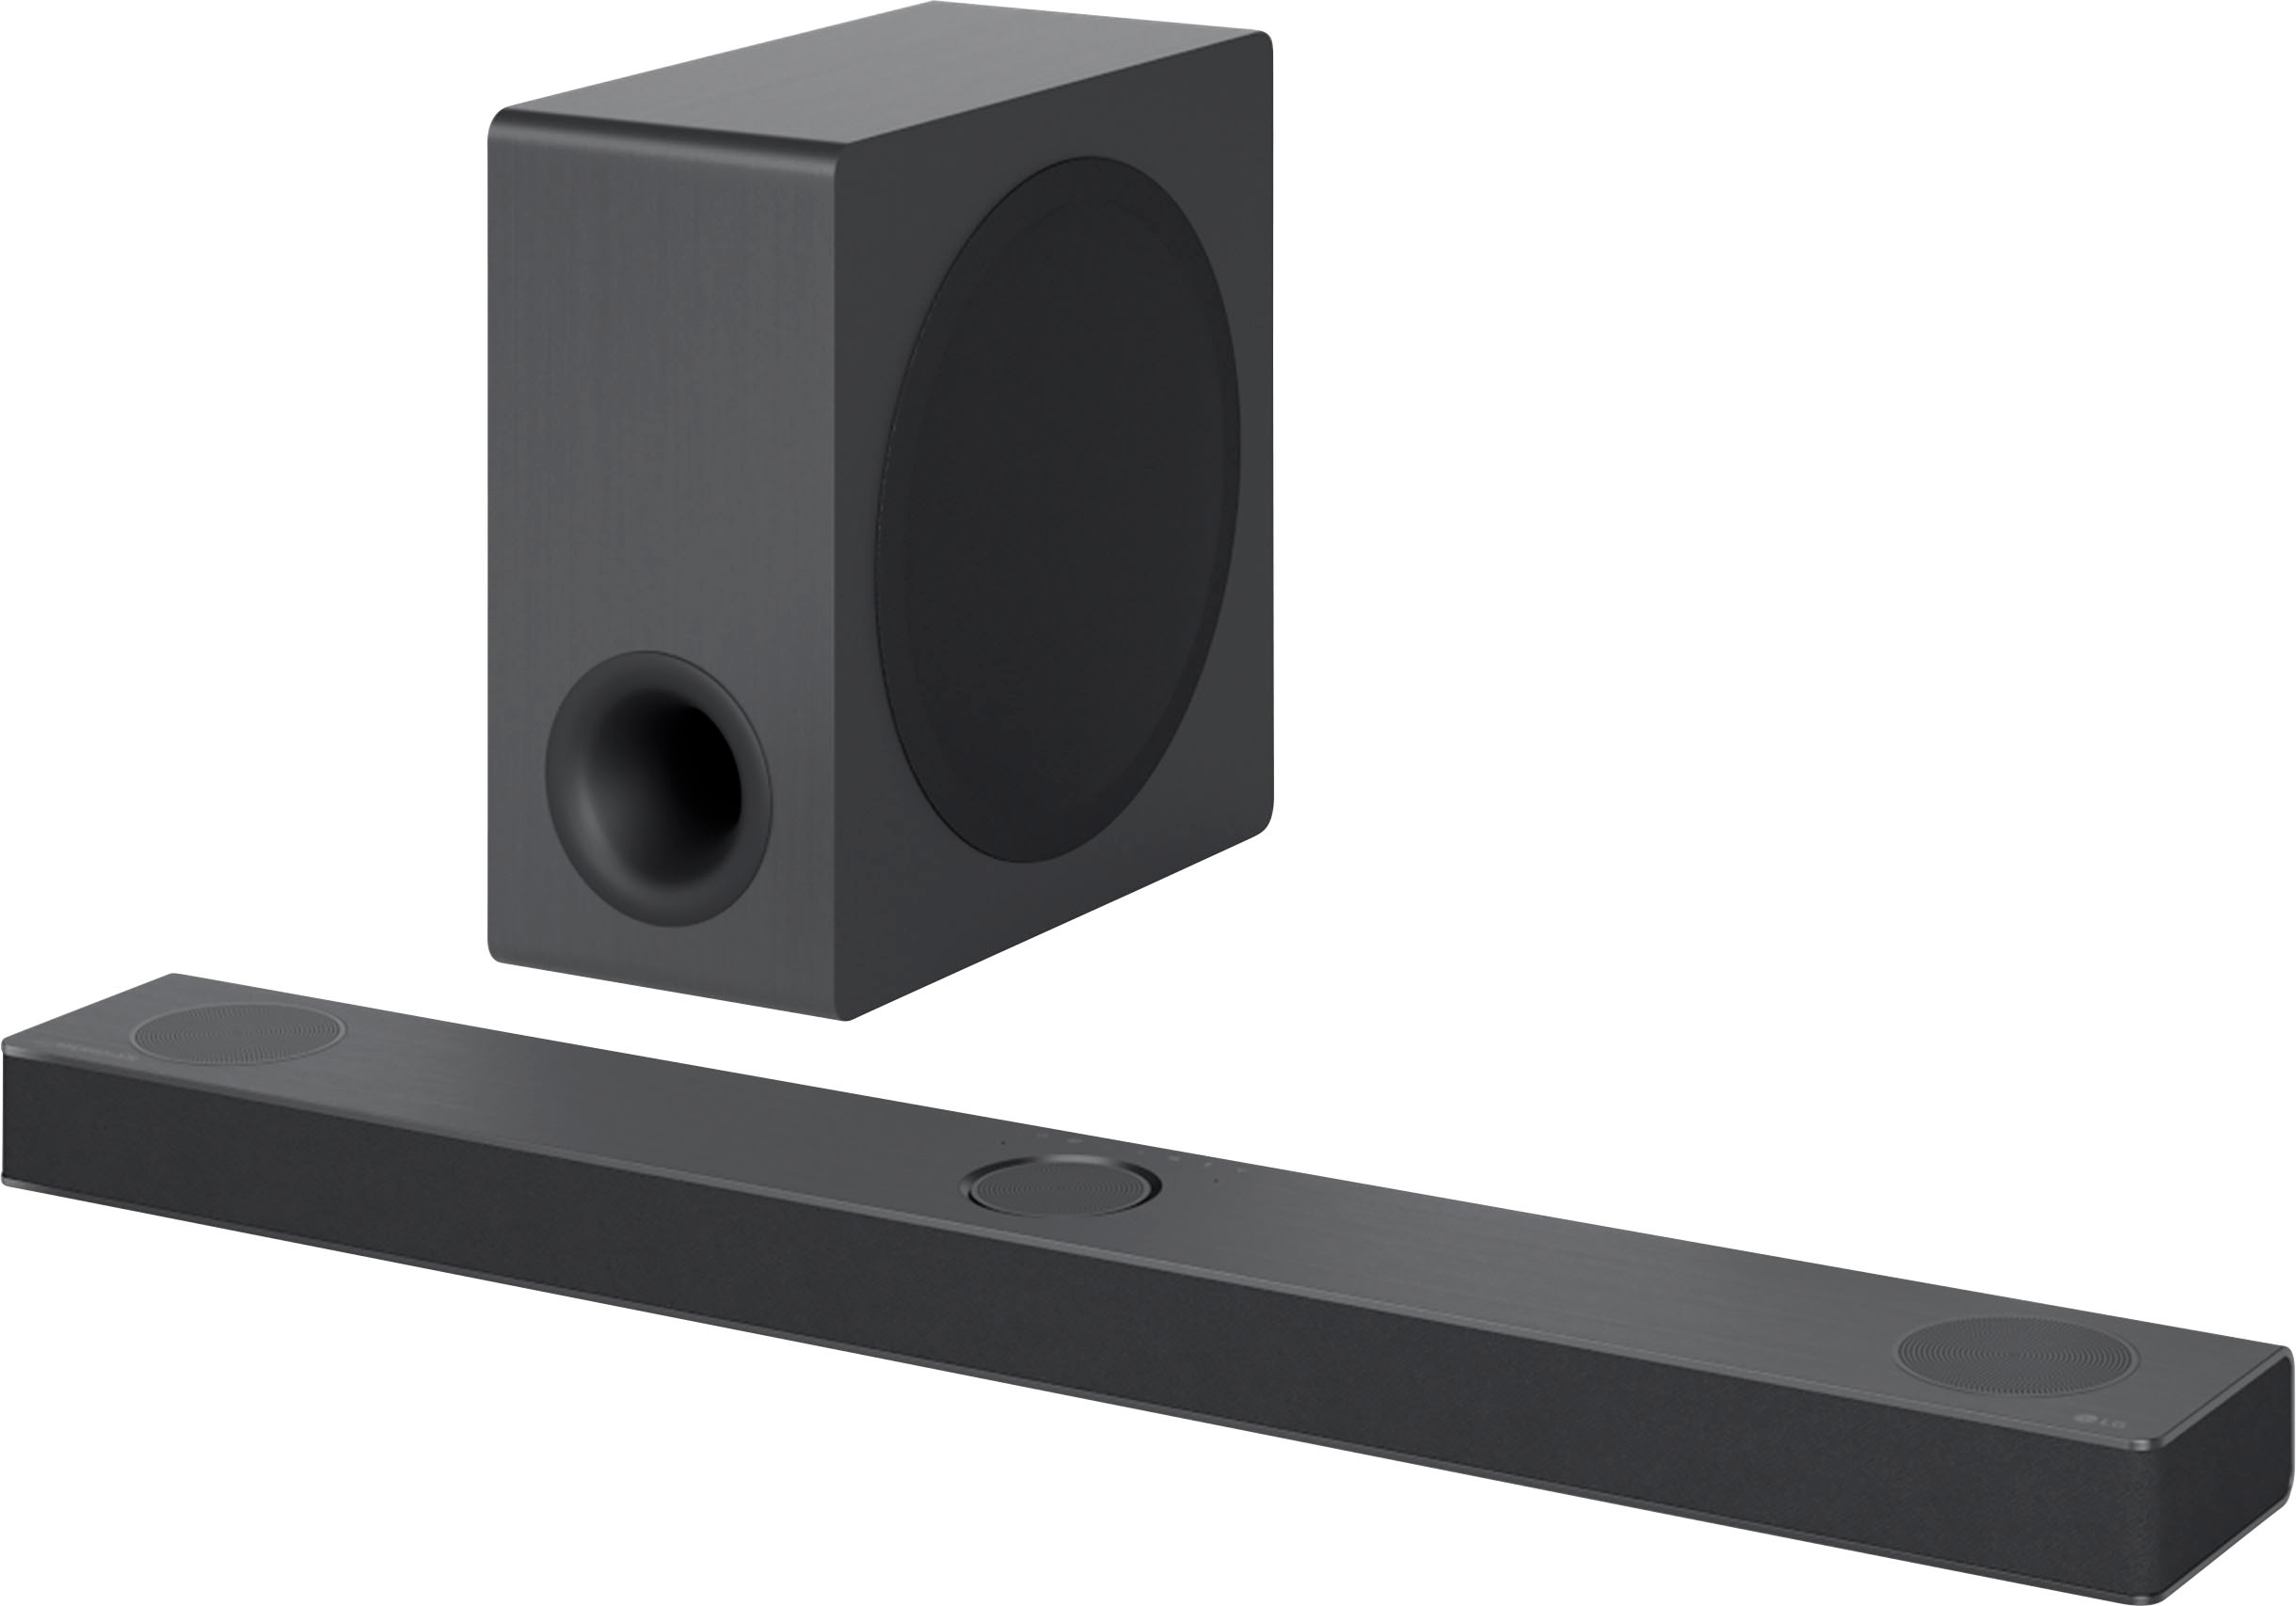 LG 3.1.3 Channel Soundbar with Wireless Subwoofer, Dolby Atmos and DTS:X  Black S80QY - Best Buy